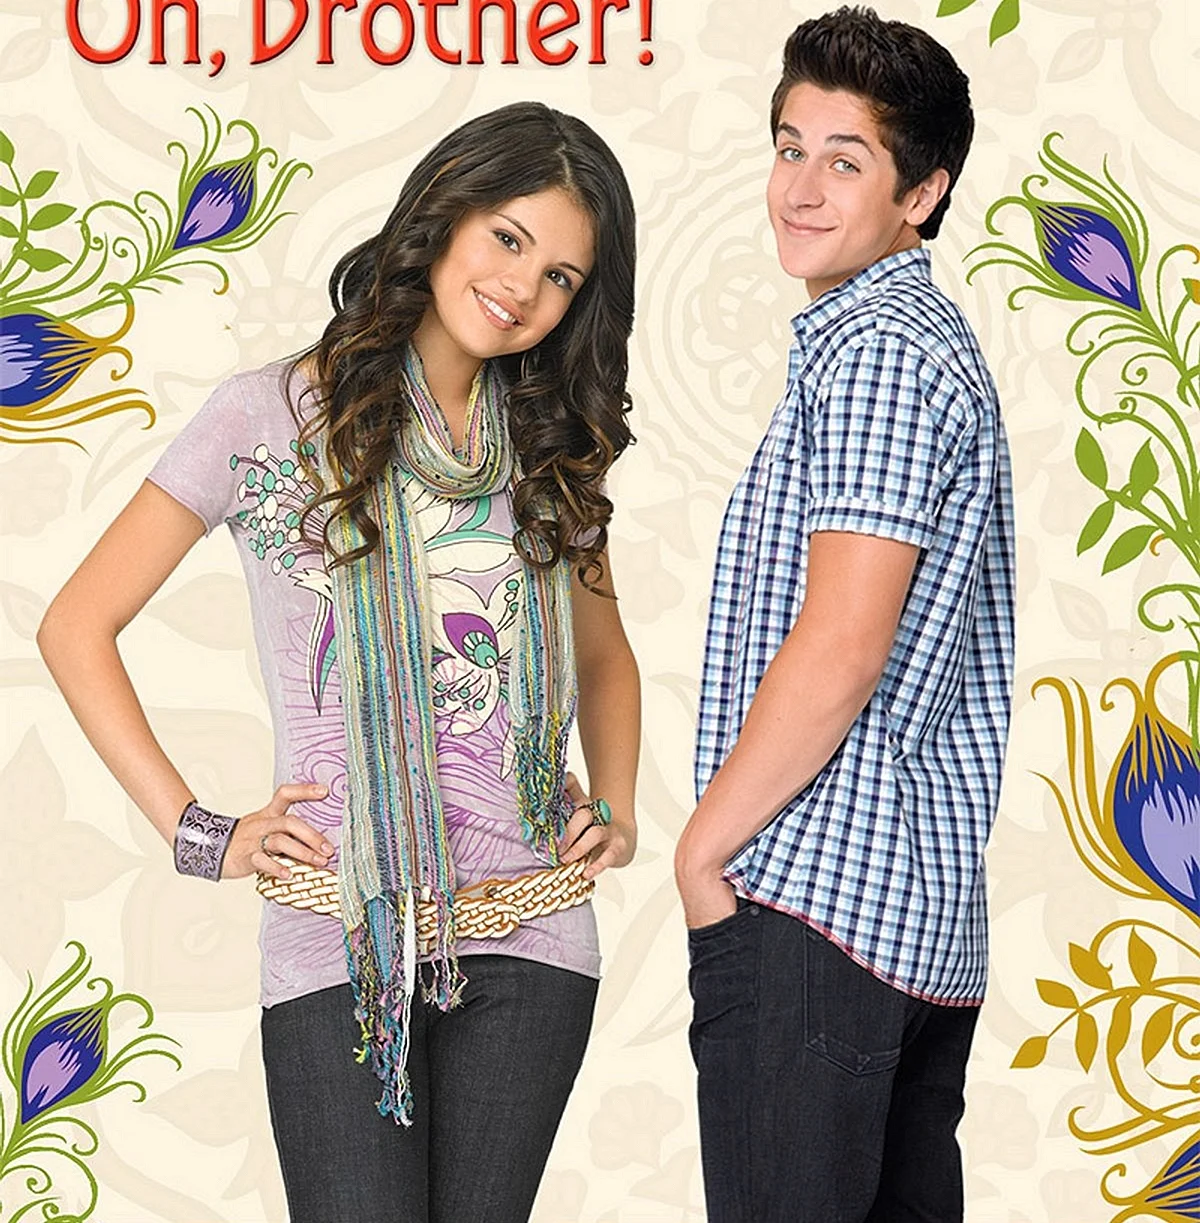 Wizards Of Waverly Place Intro Wallpaper